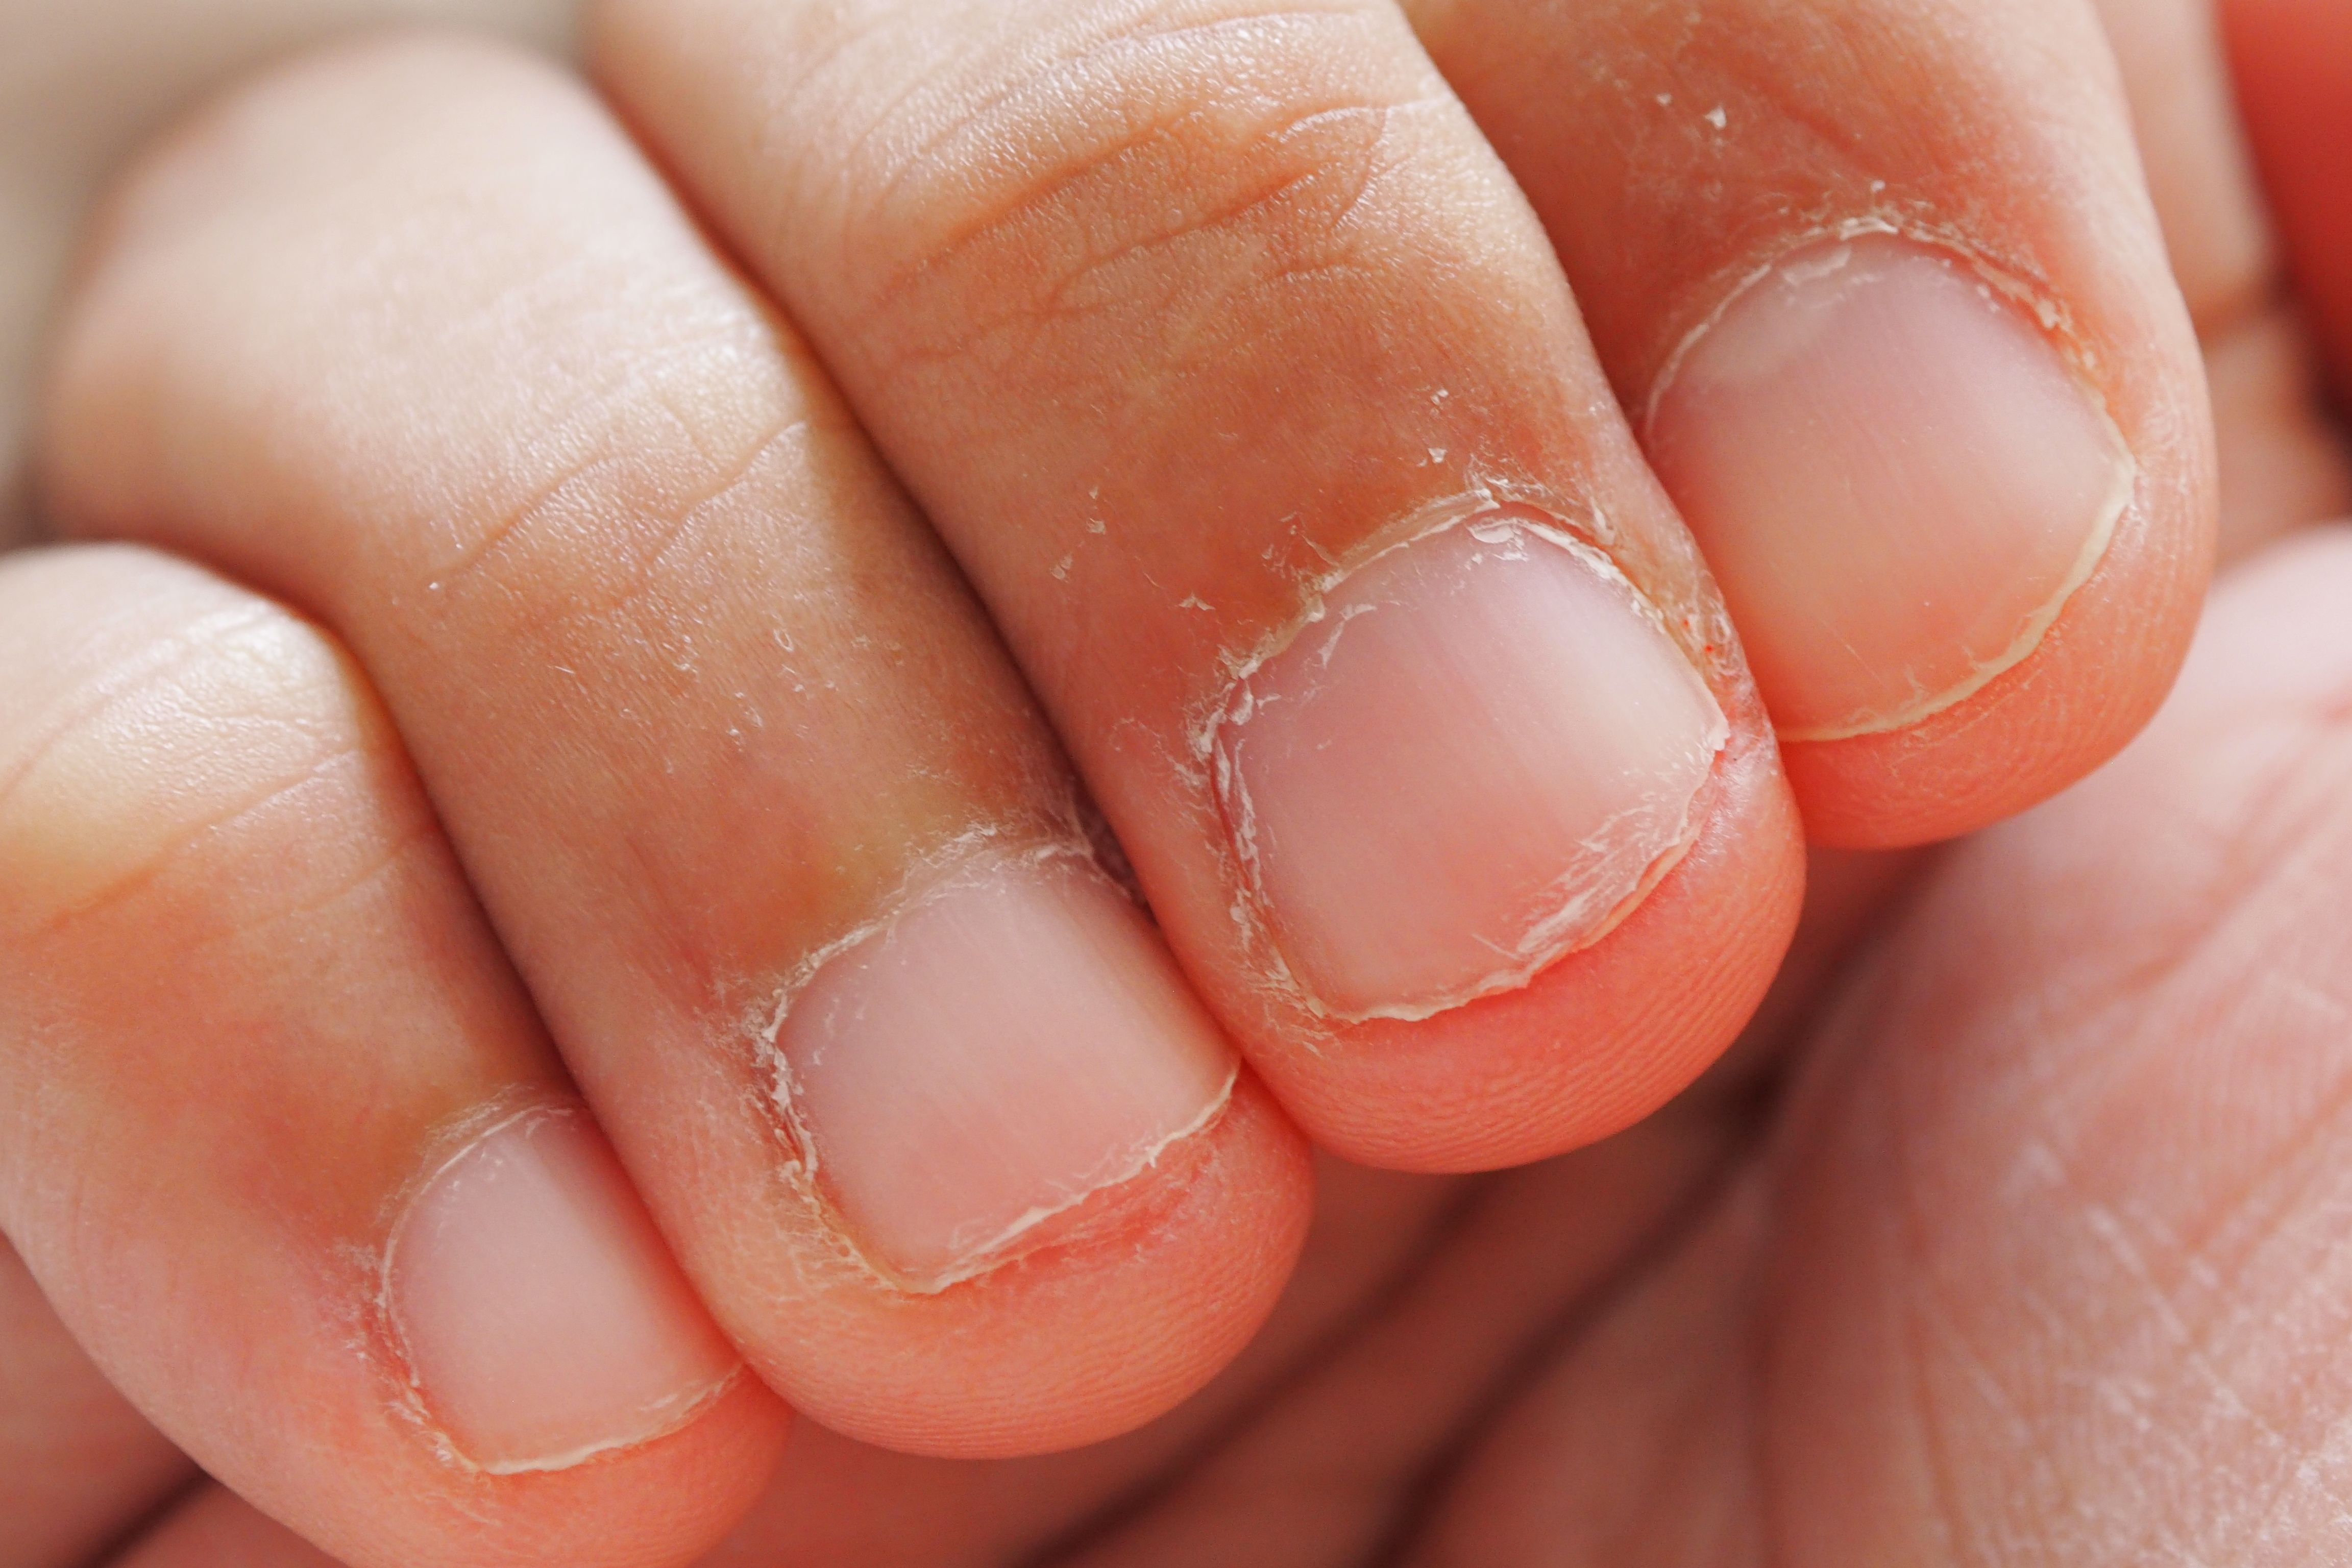 Anatomical Characteristics and Surgical Treatments of Pincer Nail Deformity